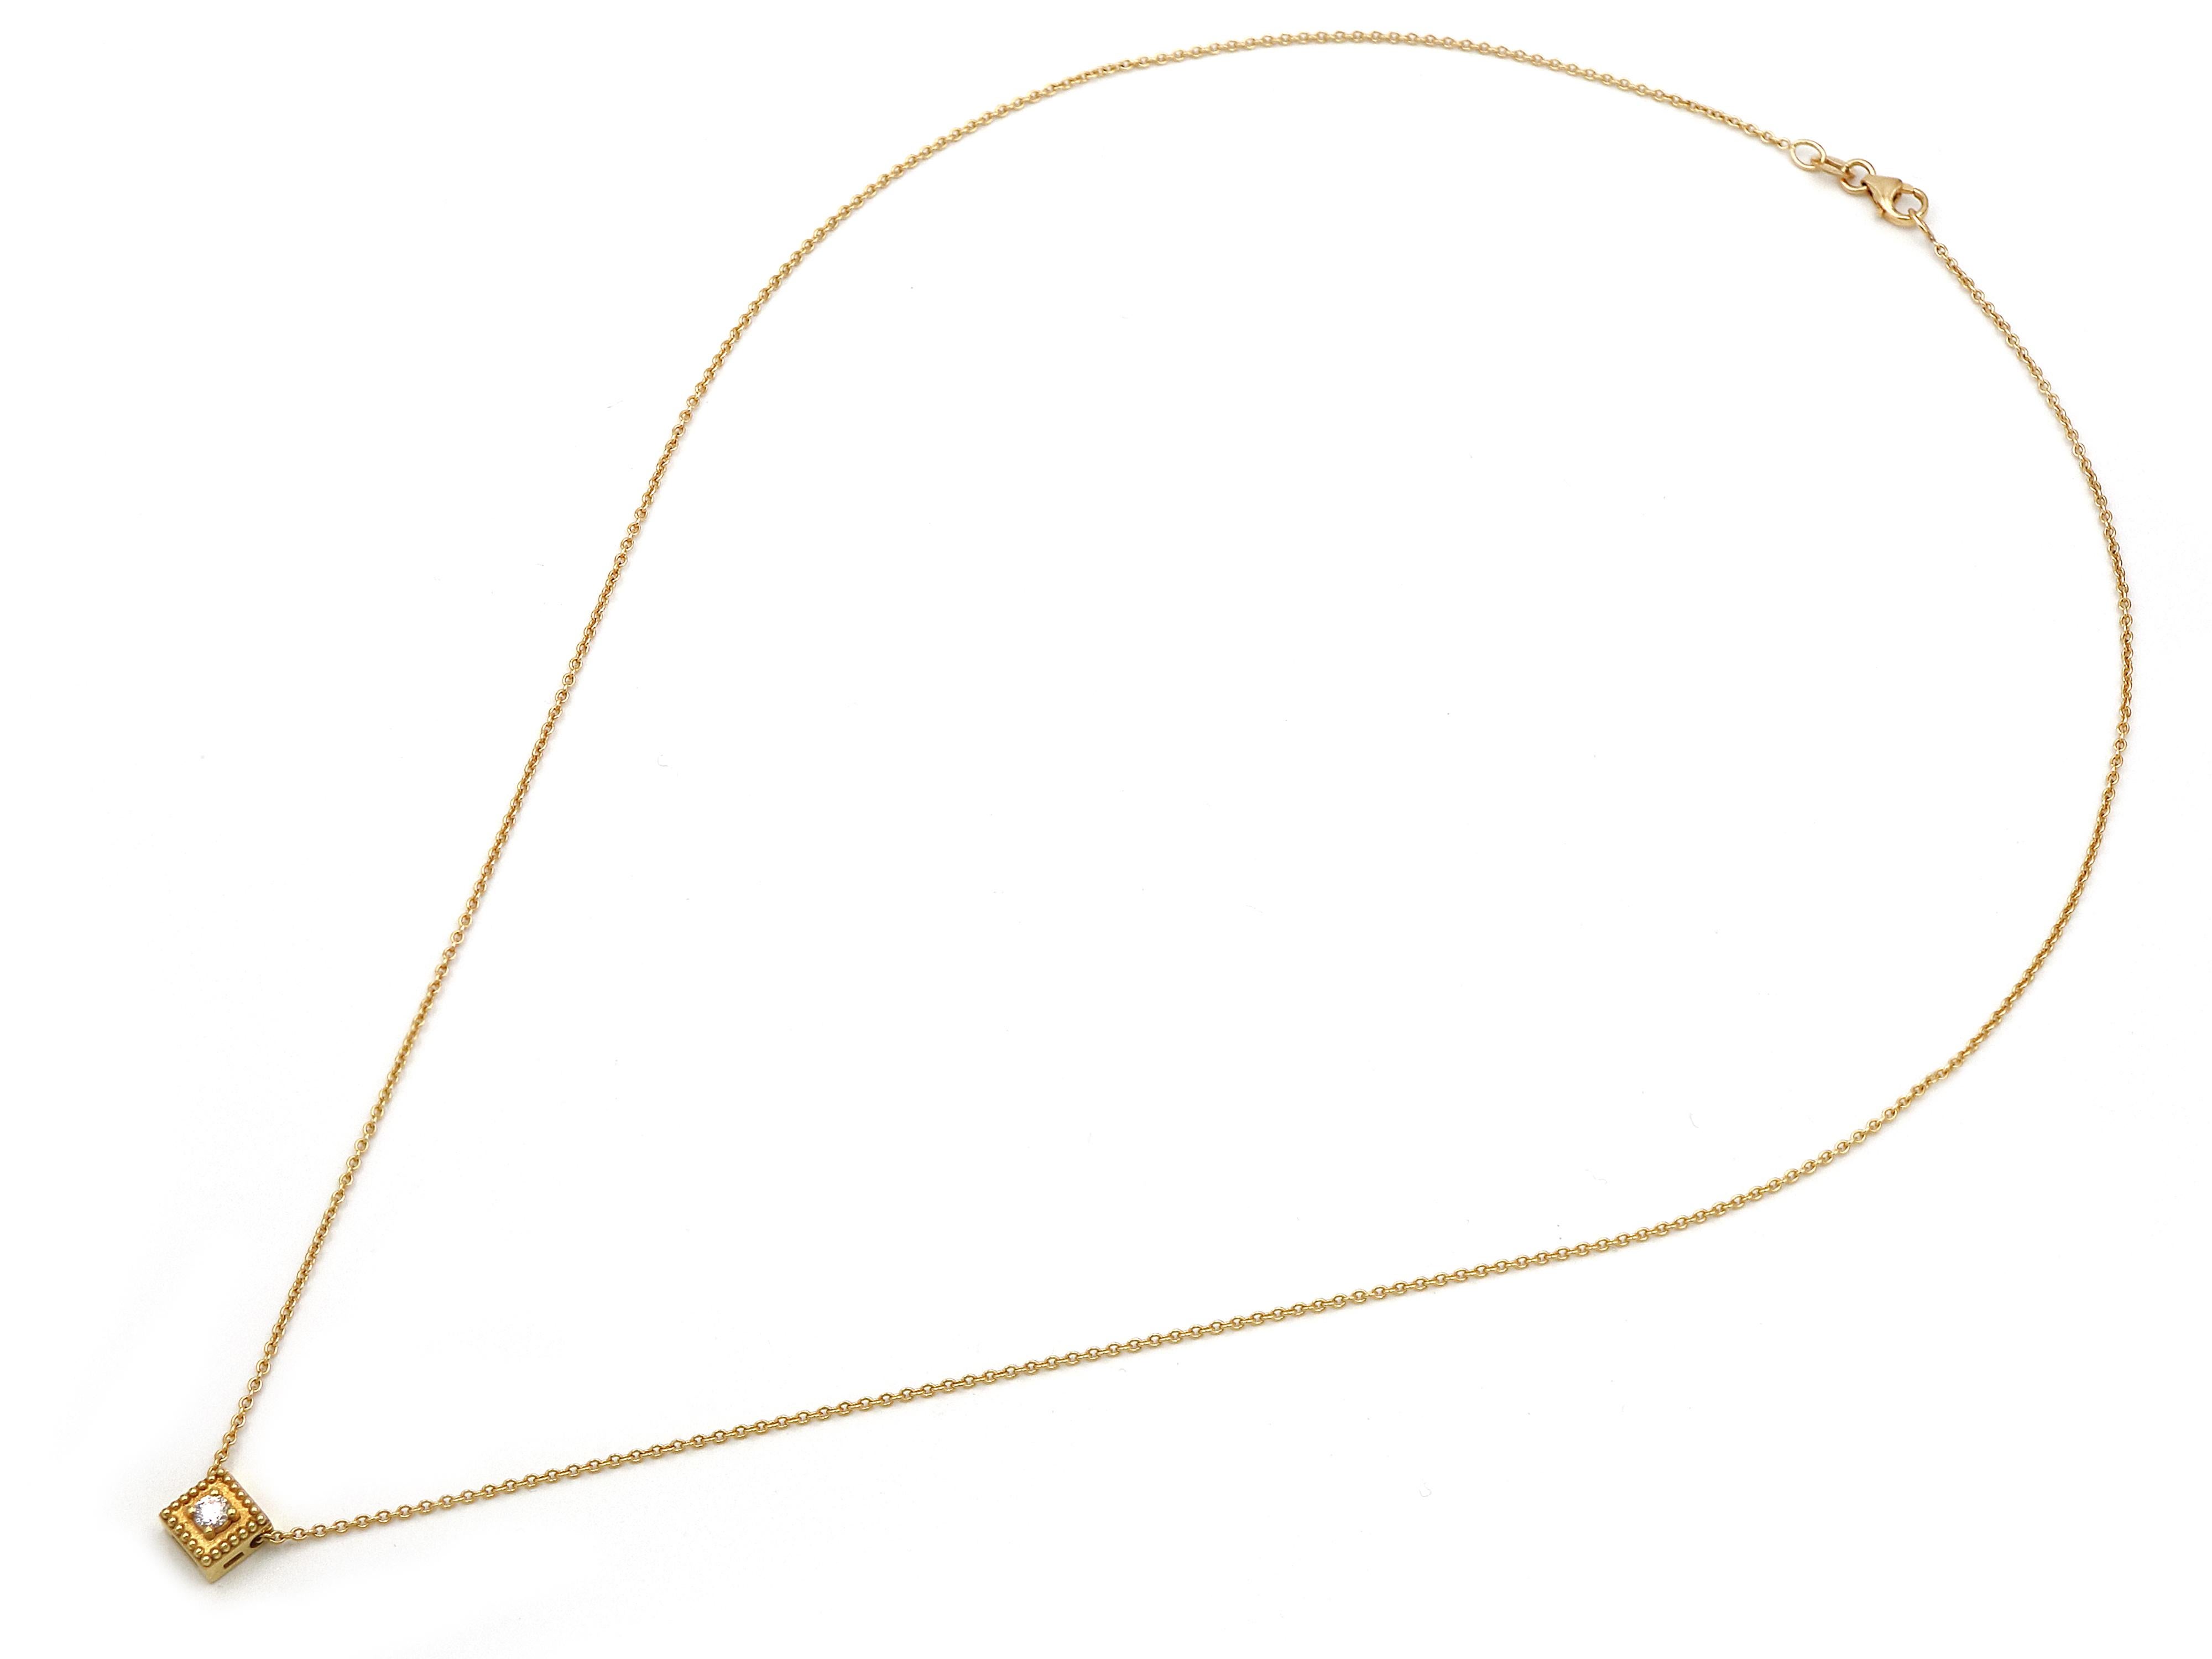 18k gold from the Balance collection Necklace that says is it all. Around in a square elements of neo classic aesthetics with granulation and set with very white brilliant diamond to assure that even small can be powerful. The perfect daily 24/7